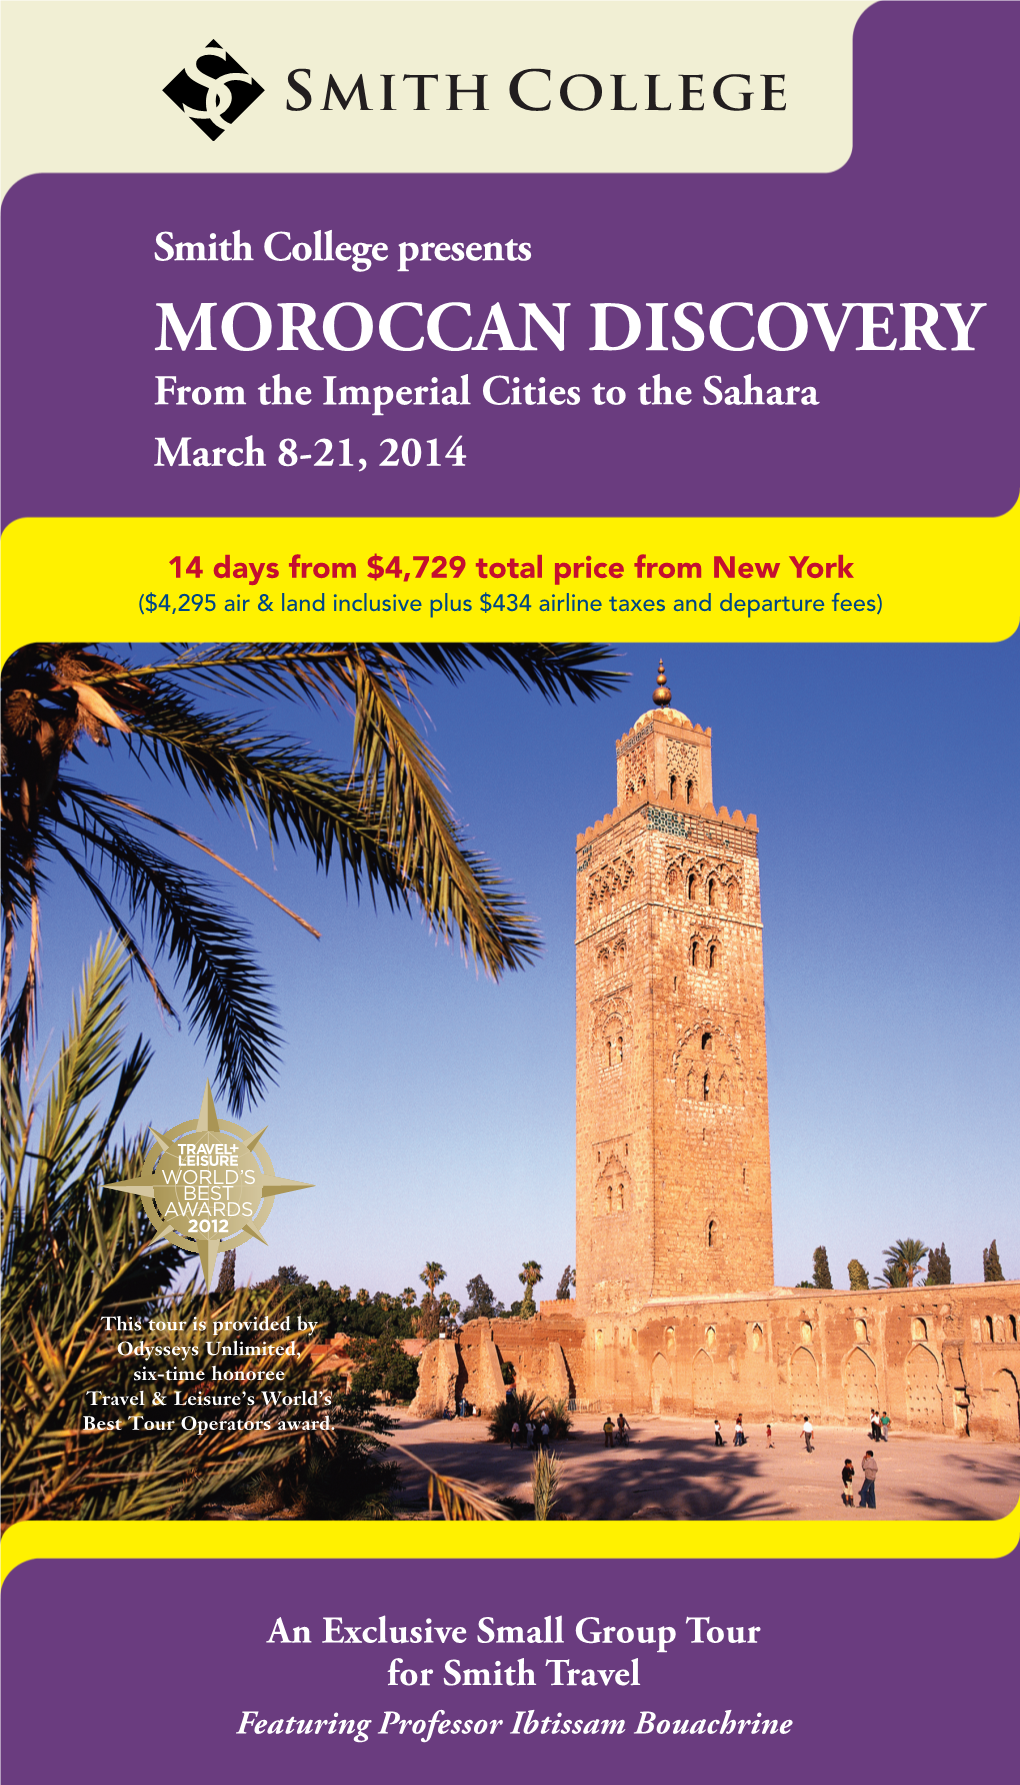 MOROCCAN DISCOVERY from the Imperial Cities to the Sahara March 8-21, 2014